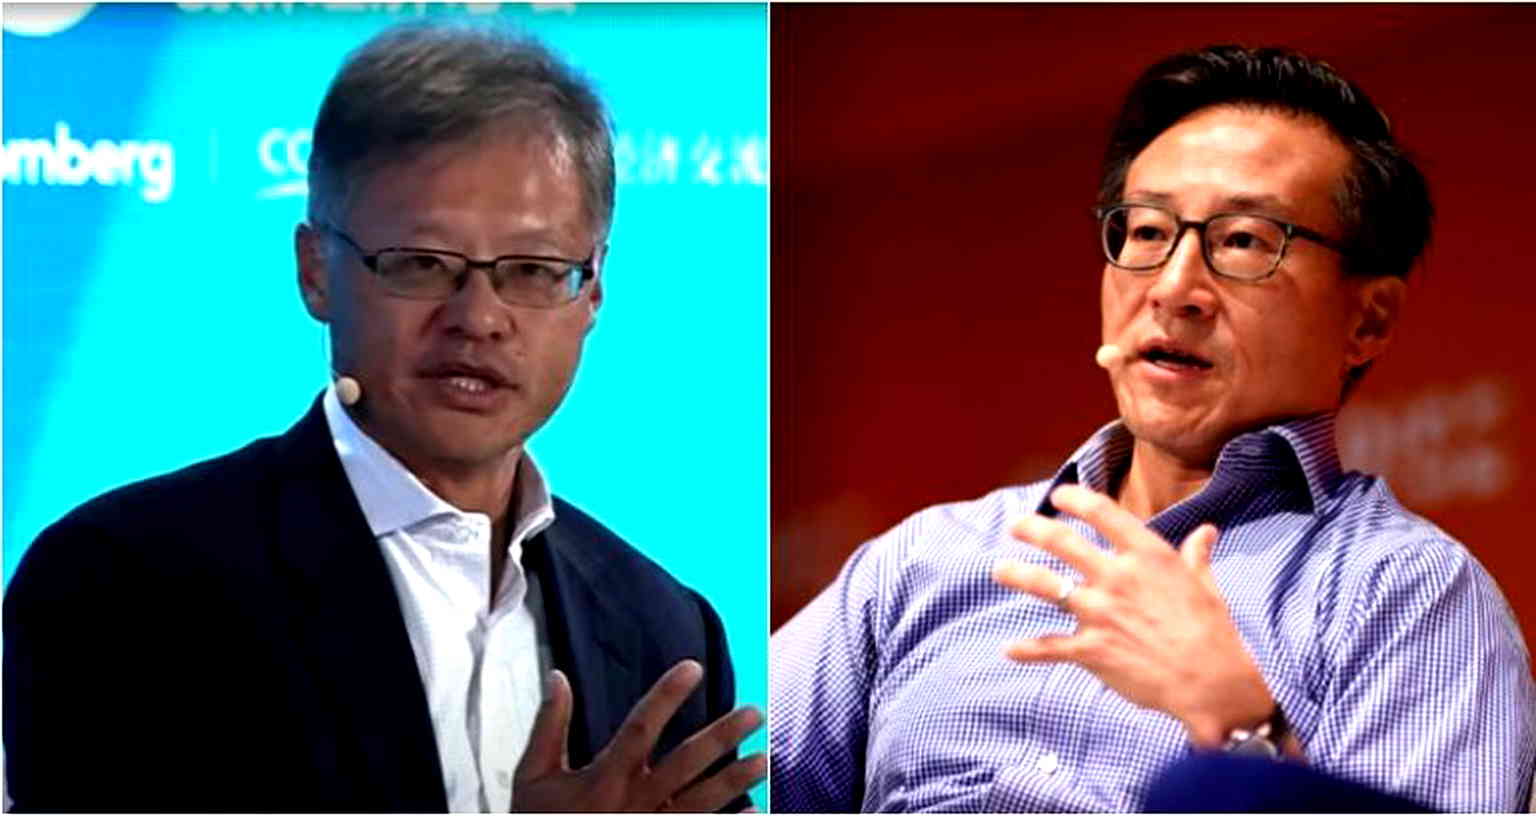 Nets’ Joe Tsai, Yahoo Founder Jerry Yang and More Launch $250 Million Initiative to Fight Hate